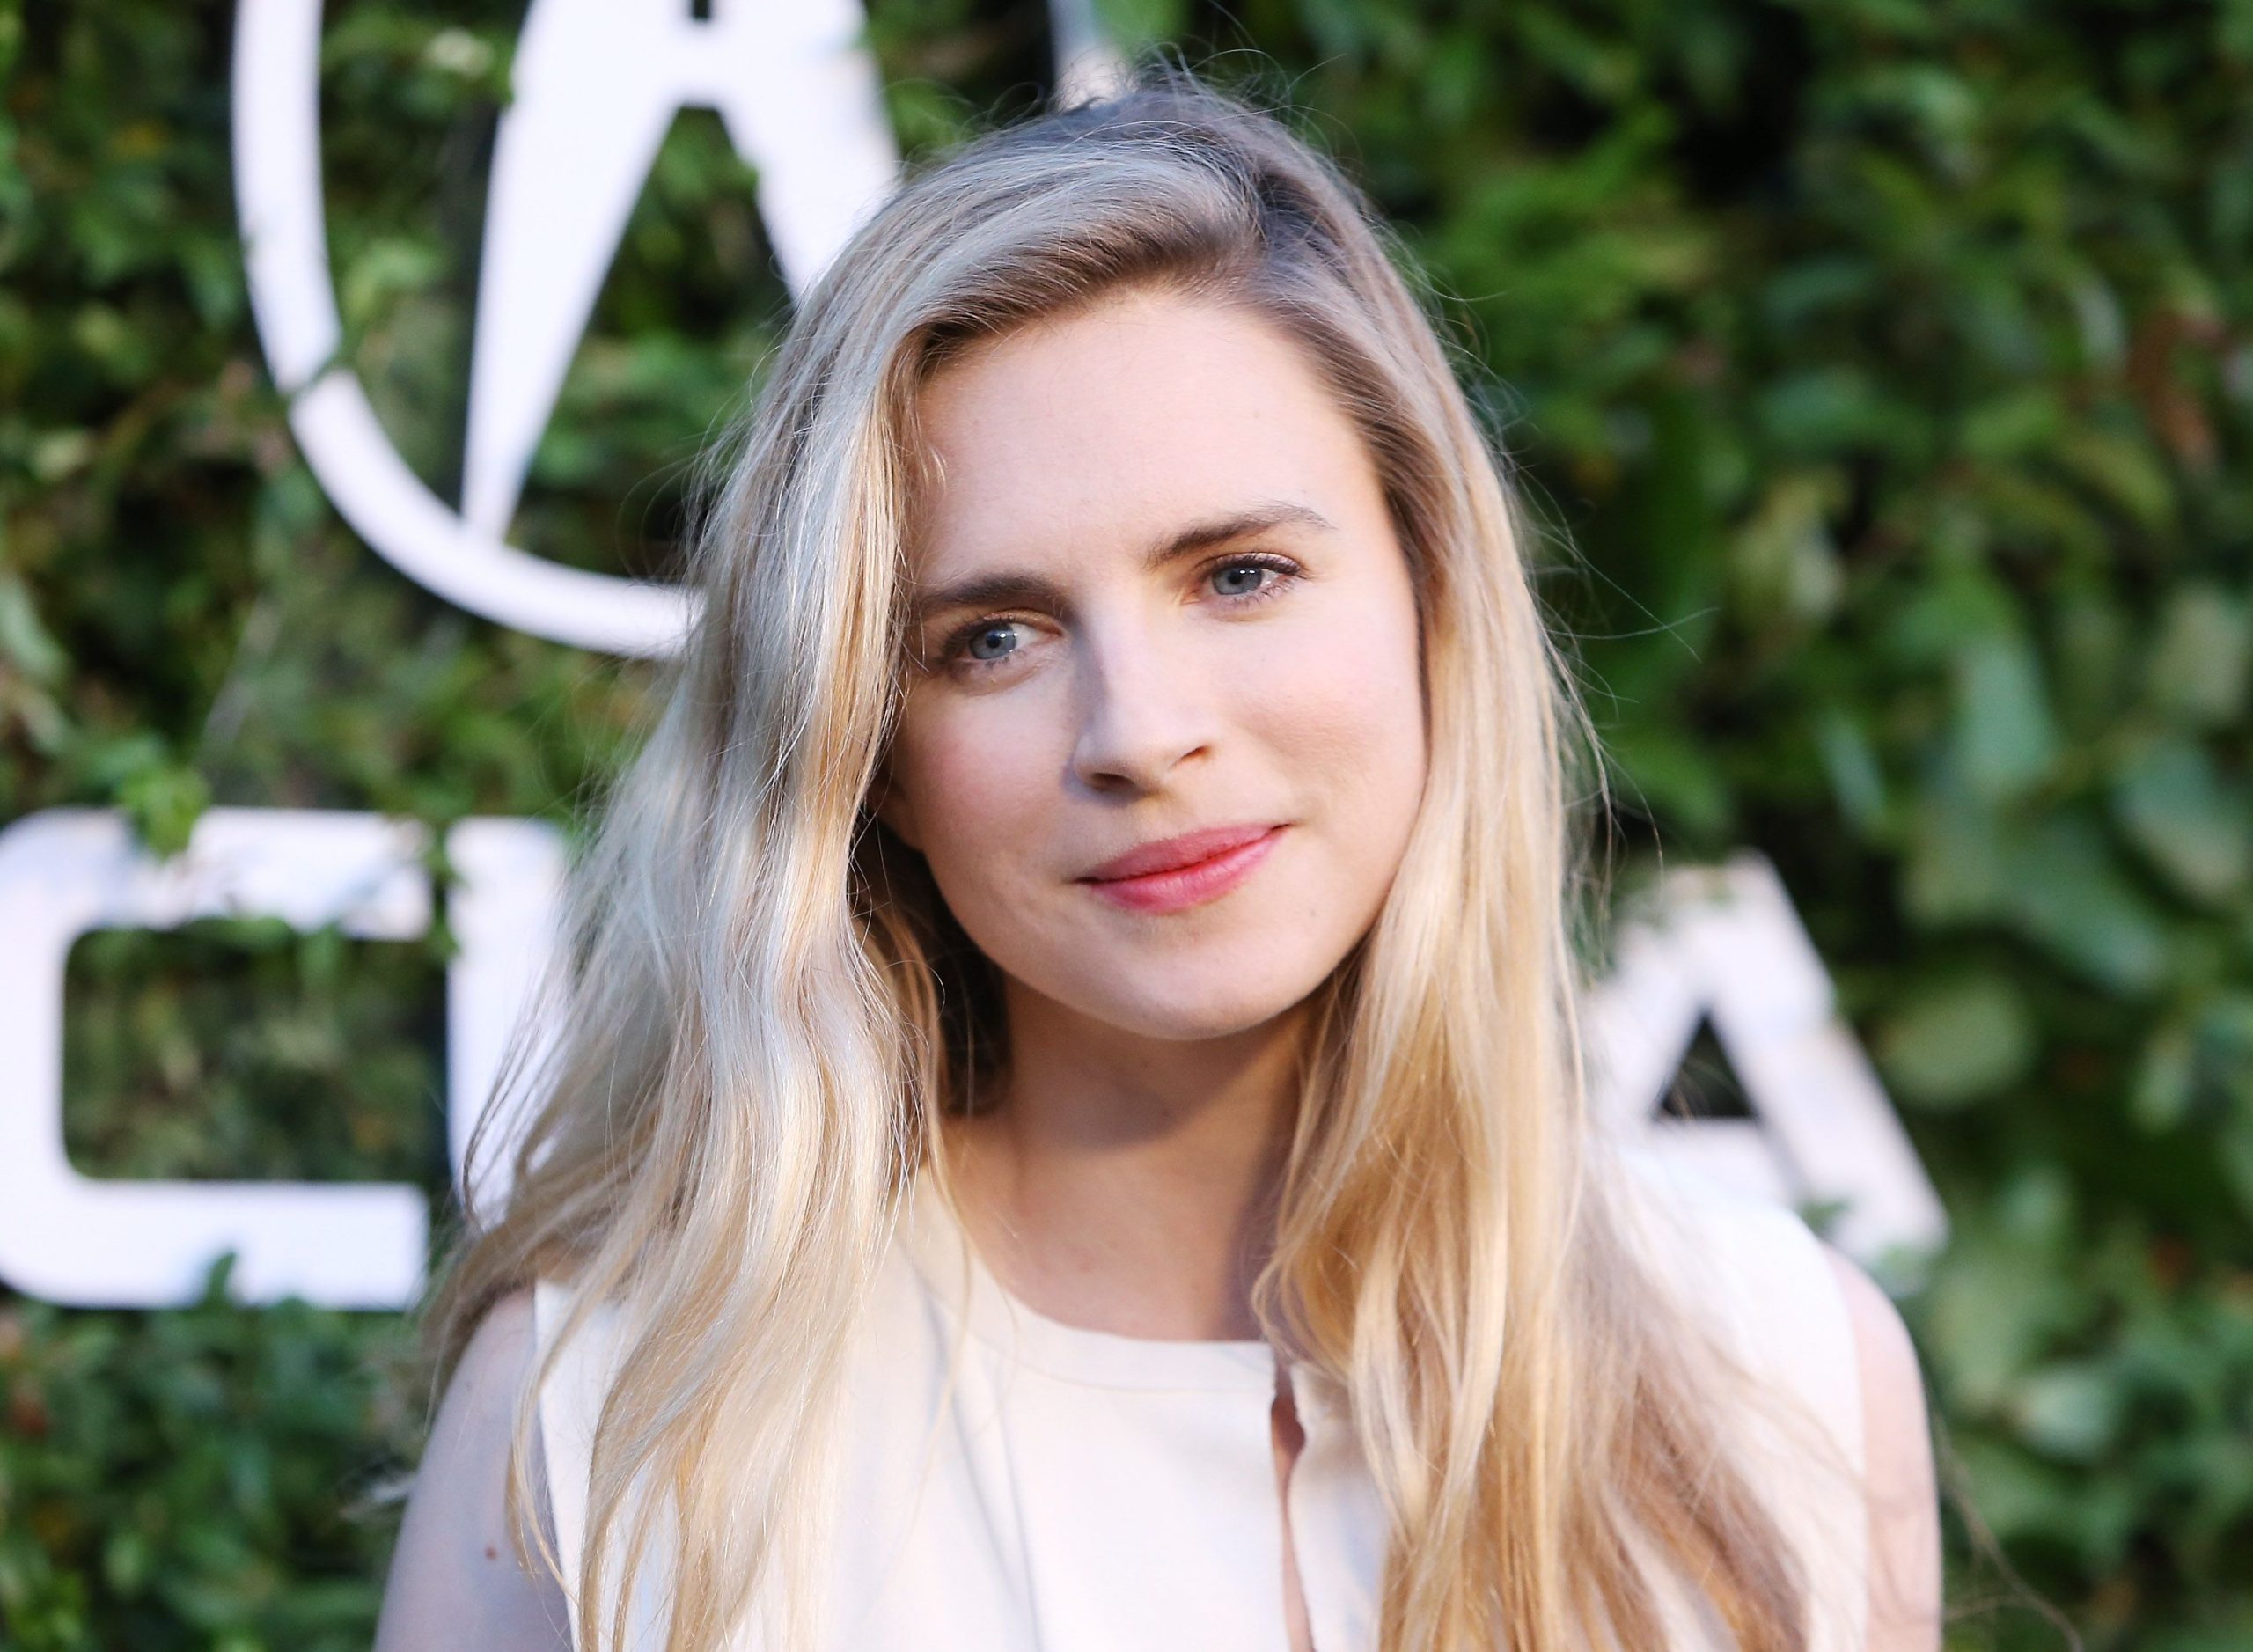 Brit Marling’s Plastic Surgery – What We Know So Far